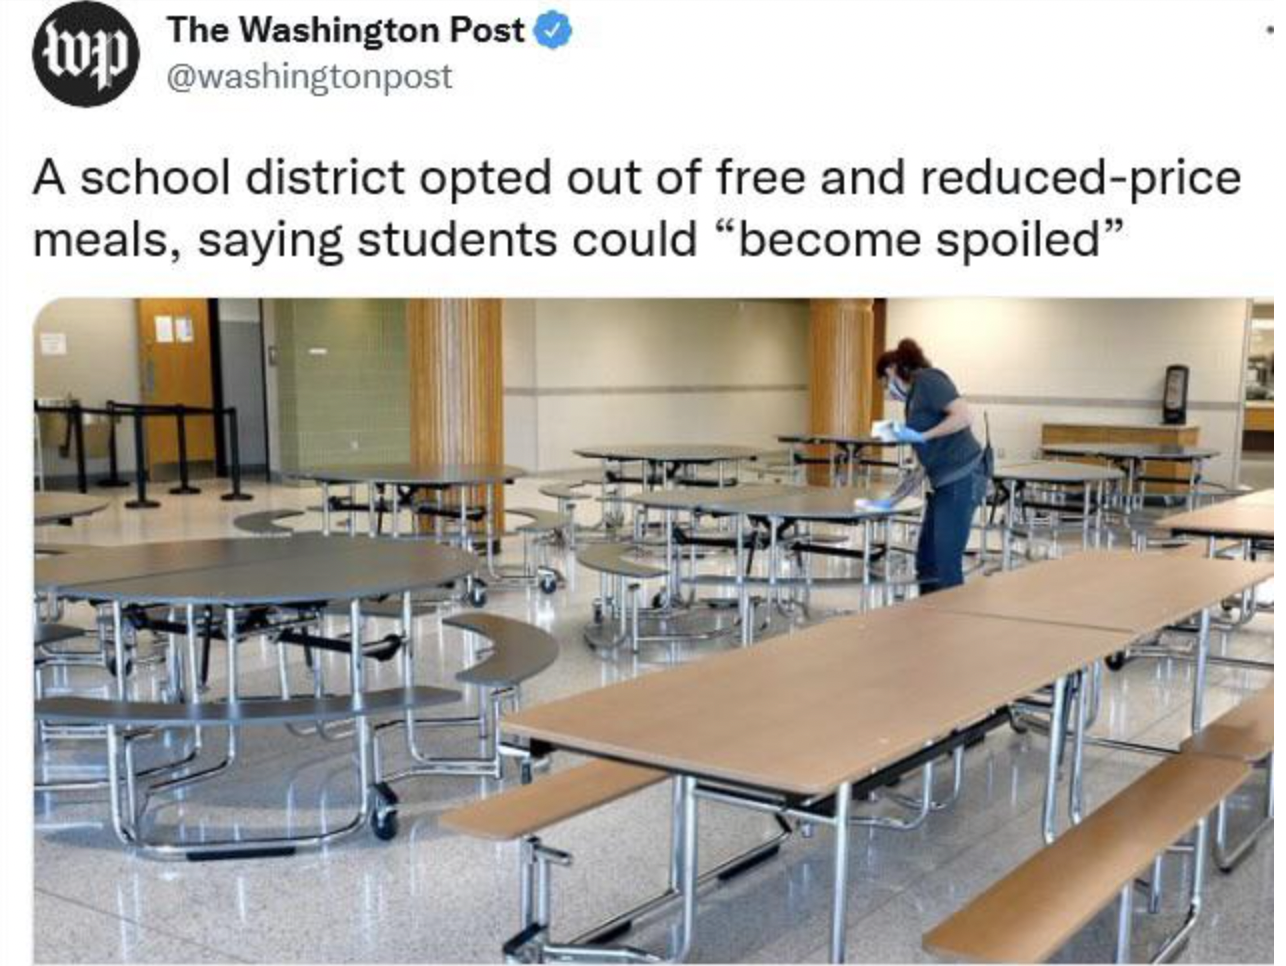 classroom - The Washington Post wp A school district opted out of free and reducedprice meals, saying students could "become spoiled"